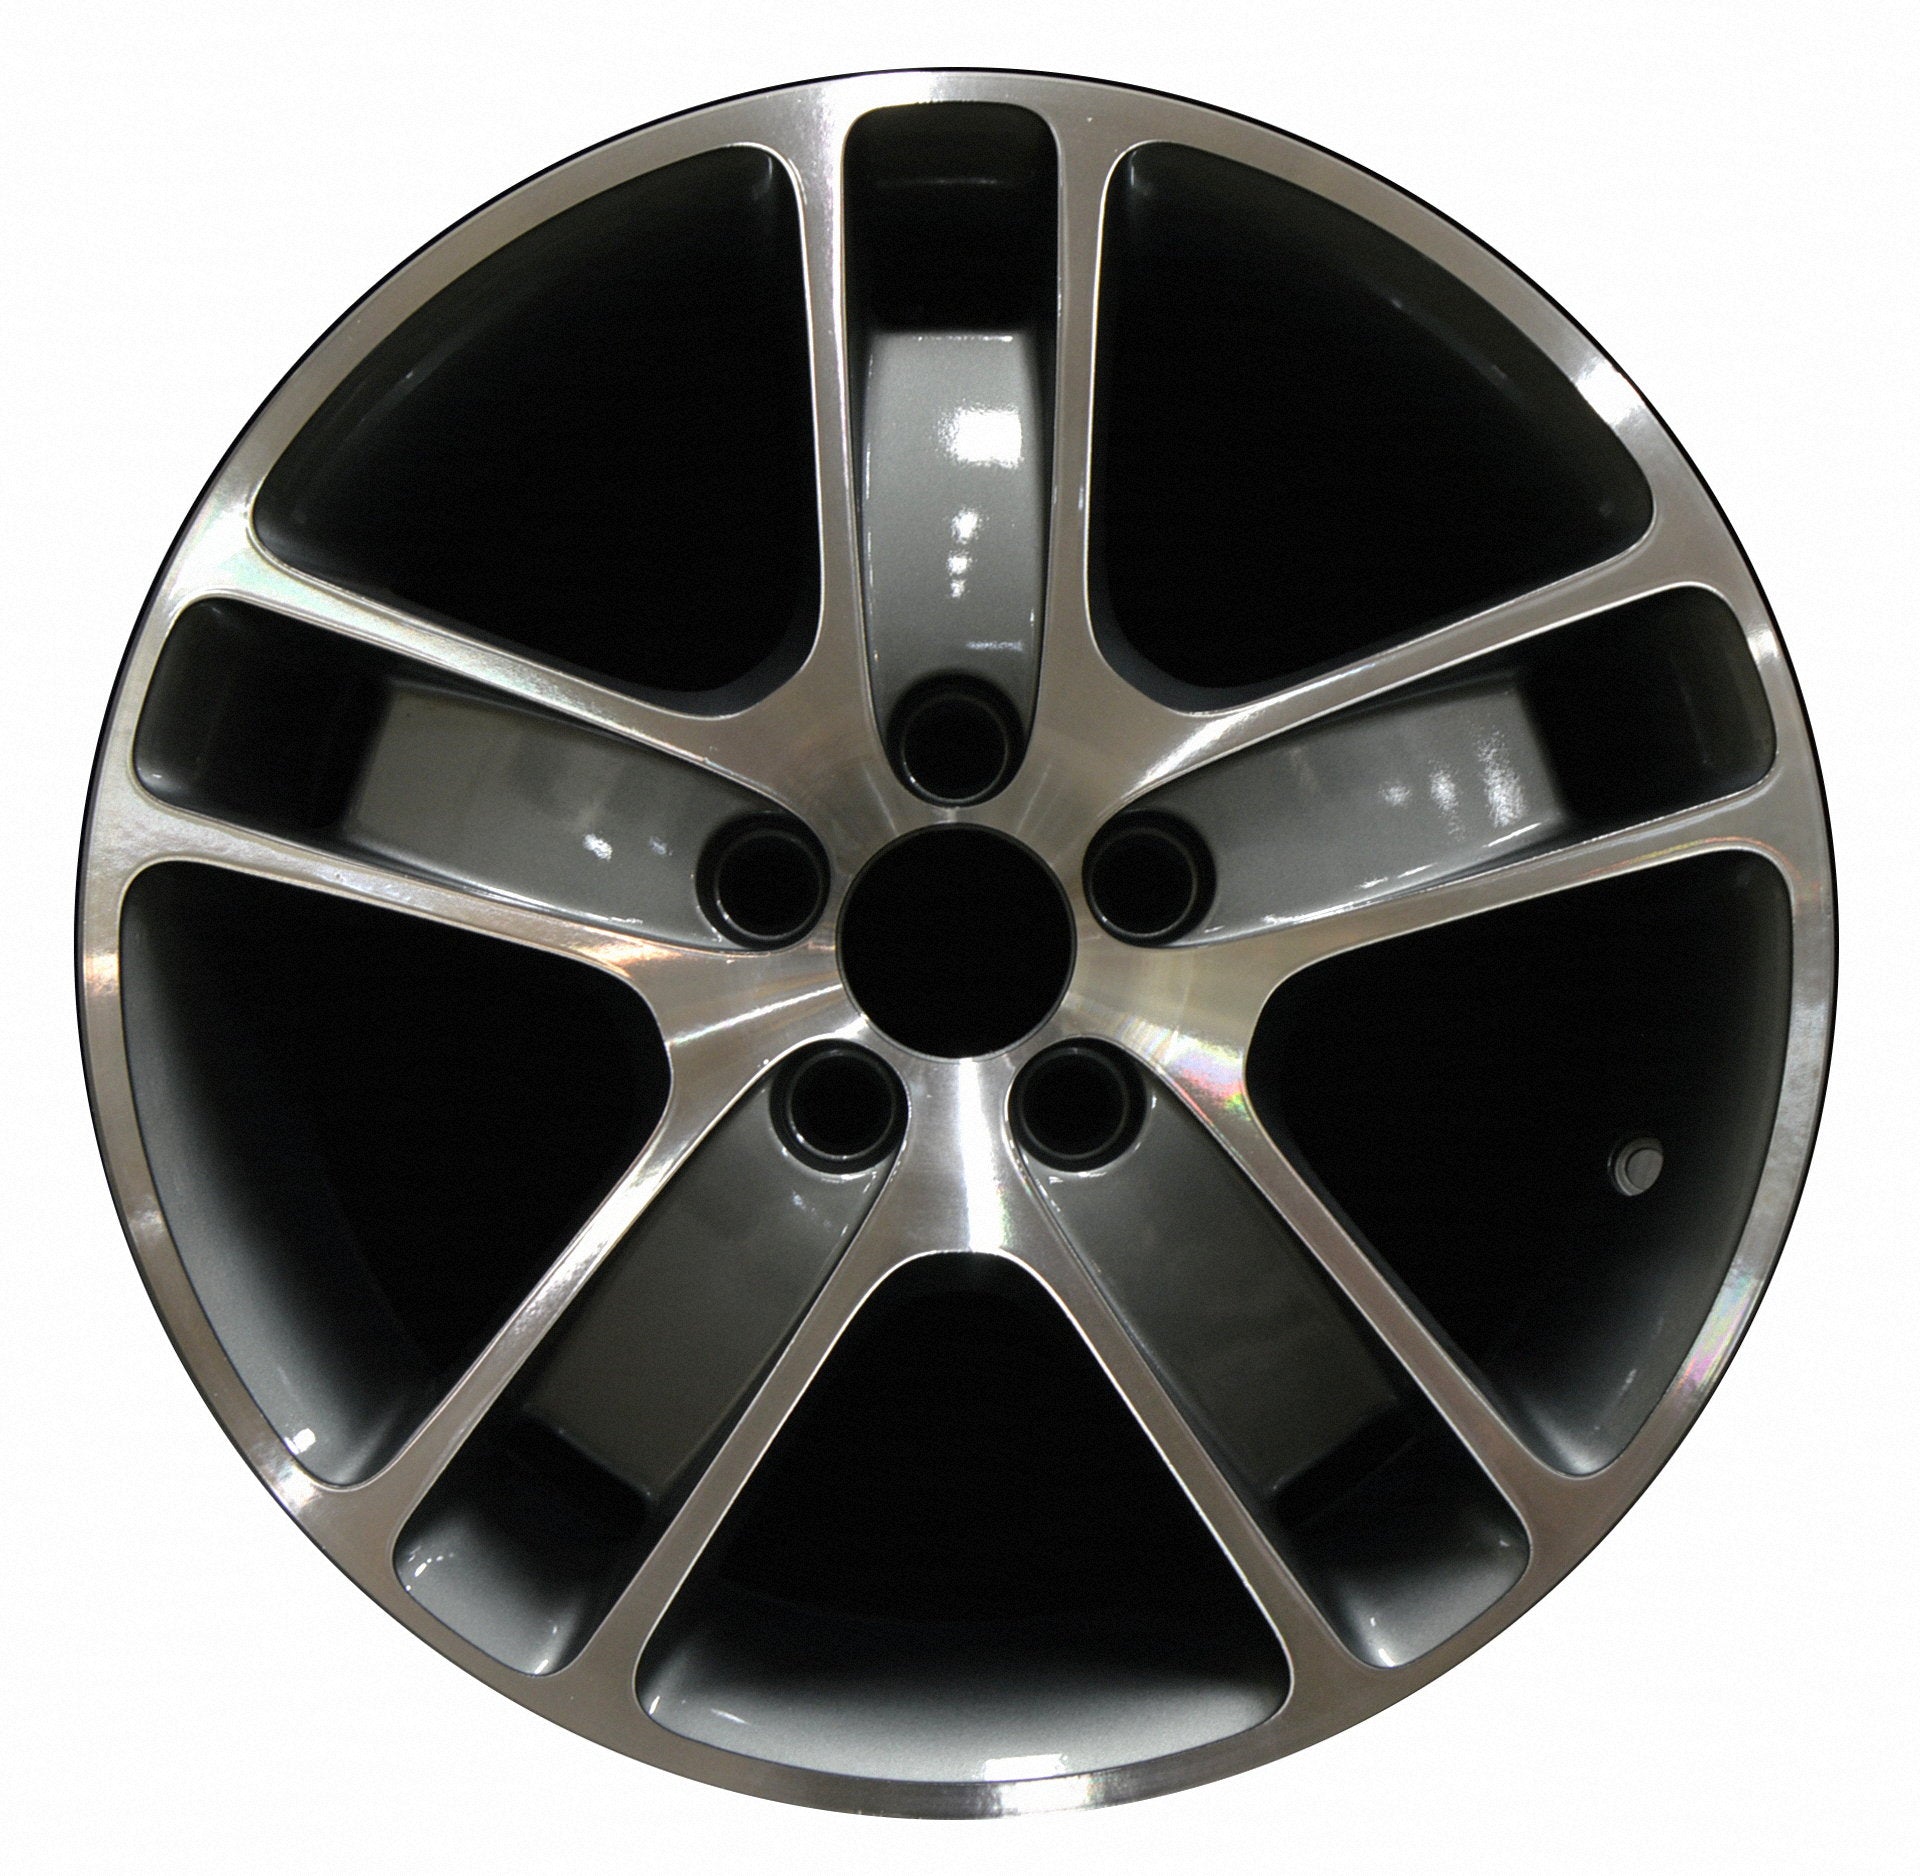 Volvo 40 Series  2007, 2008, 2009, 2010 Factory OEM Car Wheel Size 17x7 Alloy WAO.70302.LC33.MA